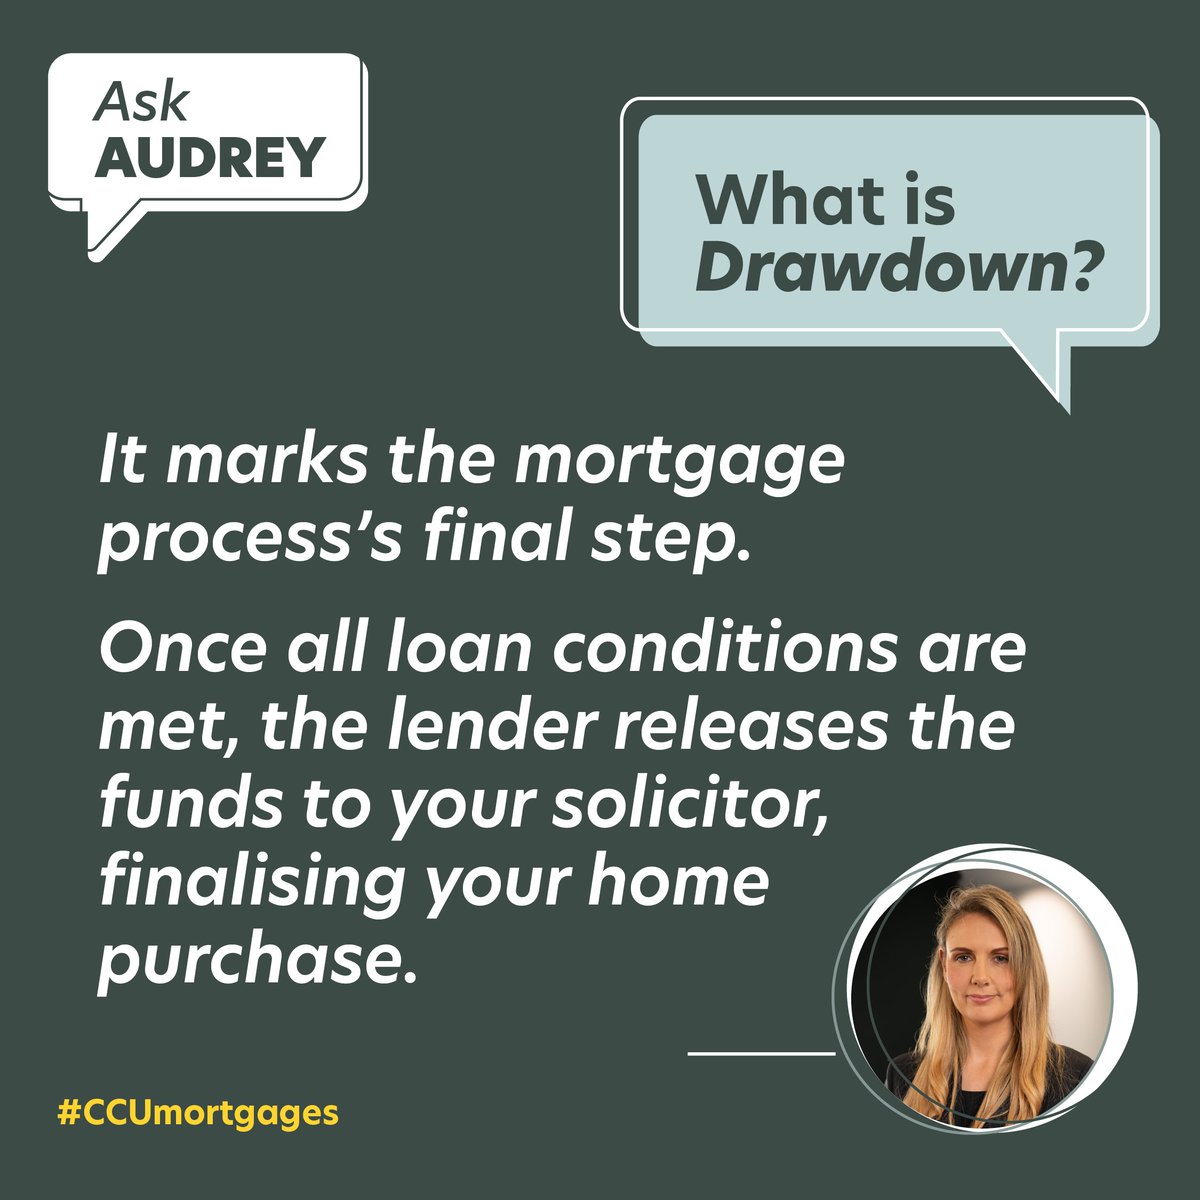 The drawdown stage is a major milestone in your home-buying journey when all your planning and preparation paid off. 

Curious about how to get to this stage? We are here to guide you every step of the way.  

#AskAudrey #MortgageTips #CCUmortgages #FinanceTips #mortgagehelp